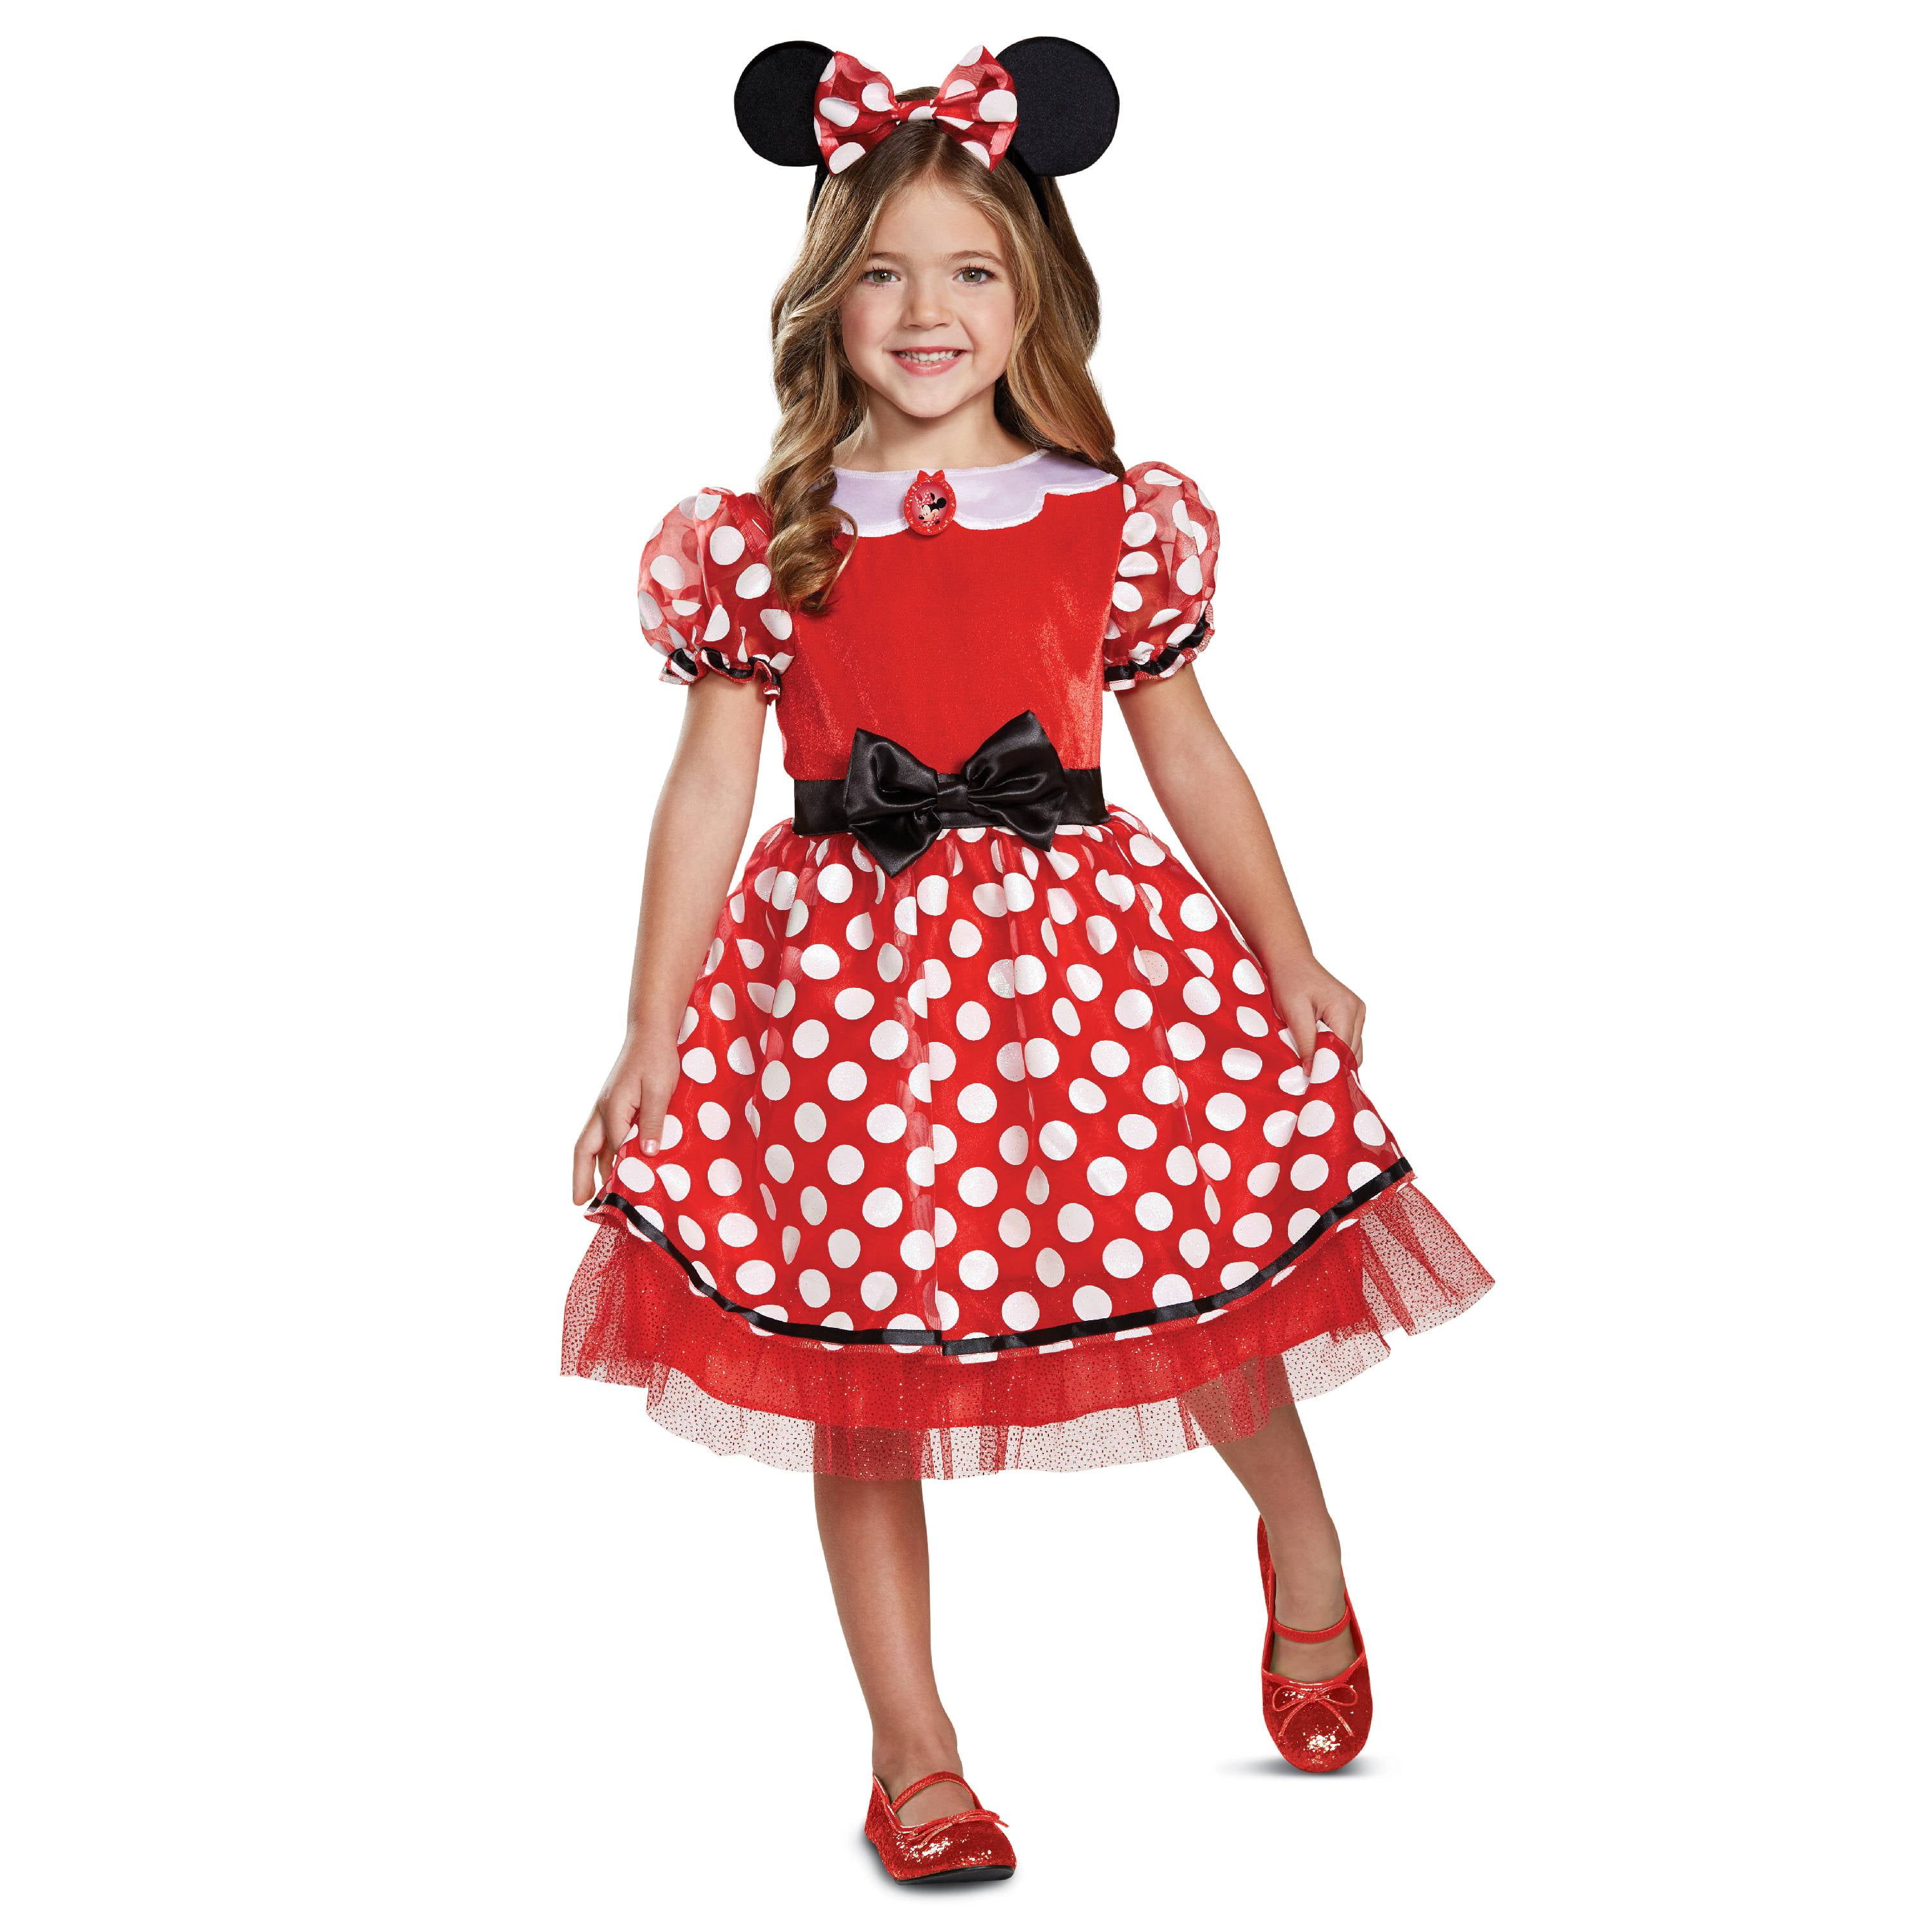 Minnie Mouse Halloween Costumes Girls Party Birthday Cosplay Fancy Dress Up Ear 